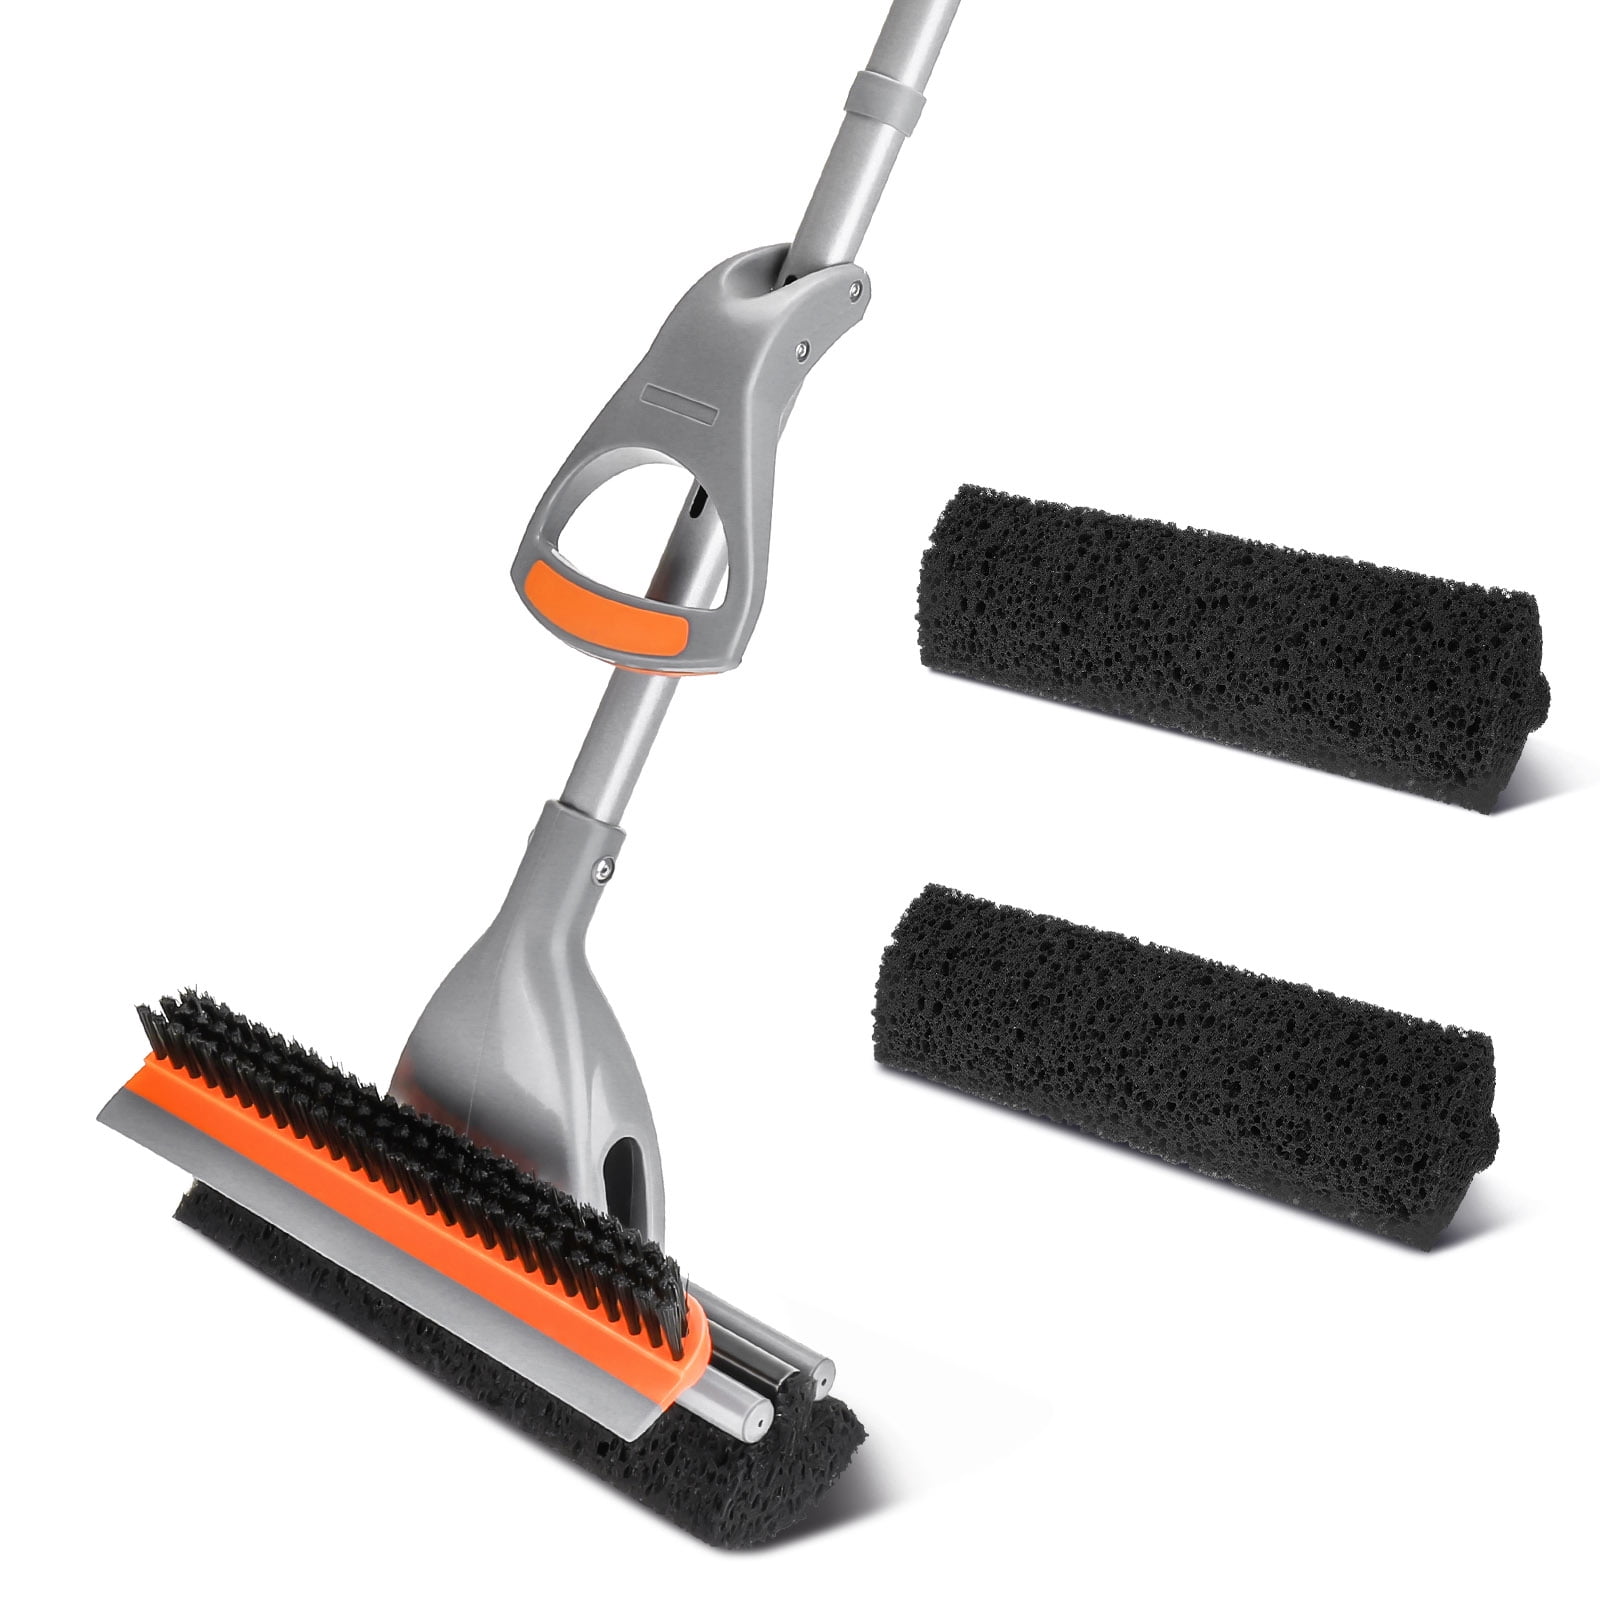 Details about   Magic Cellulose Sponge Floor Mop Bathroom Garage Cleaner W Squeegee and BrushB 